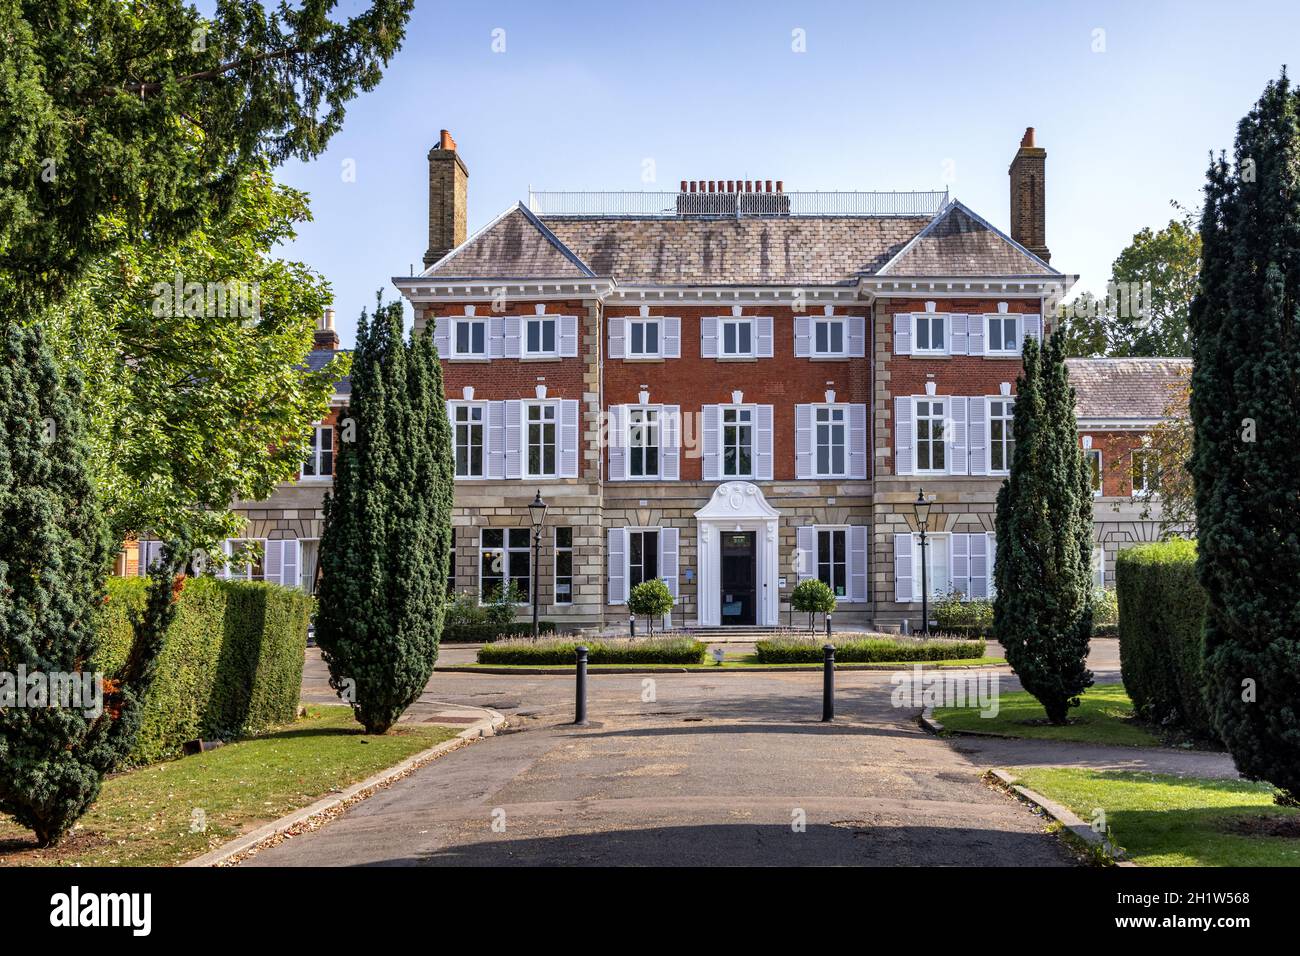 York House is a historic stately home in Twickenham, England, and currently serves as the Town Hall of the London Borough of Richmond upon Thames. Stock Photo